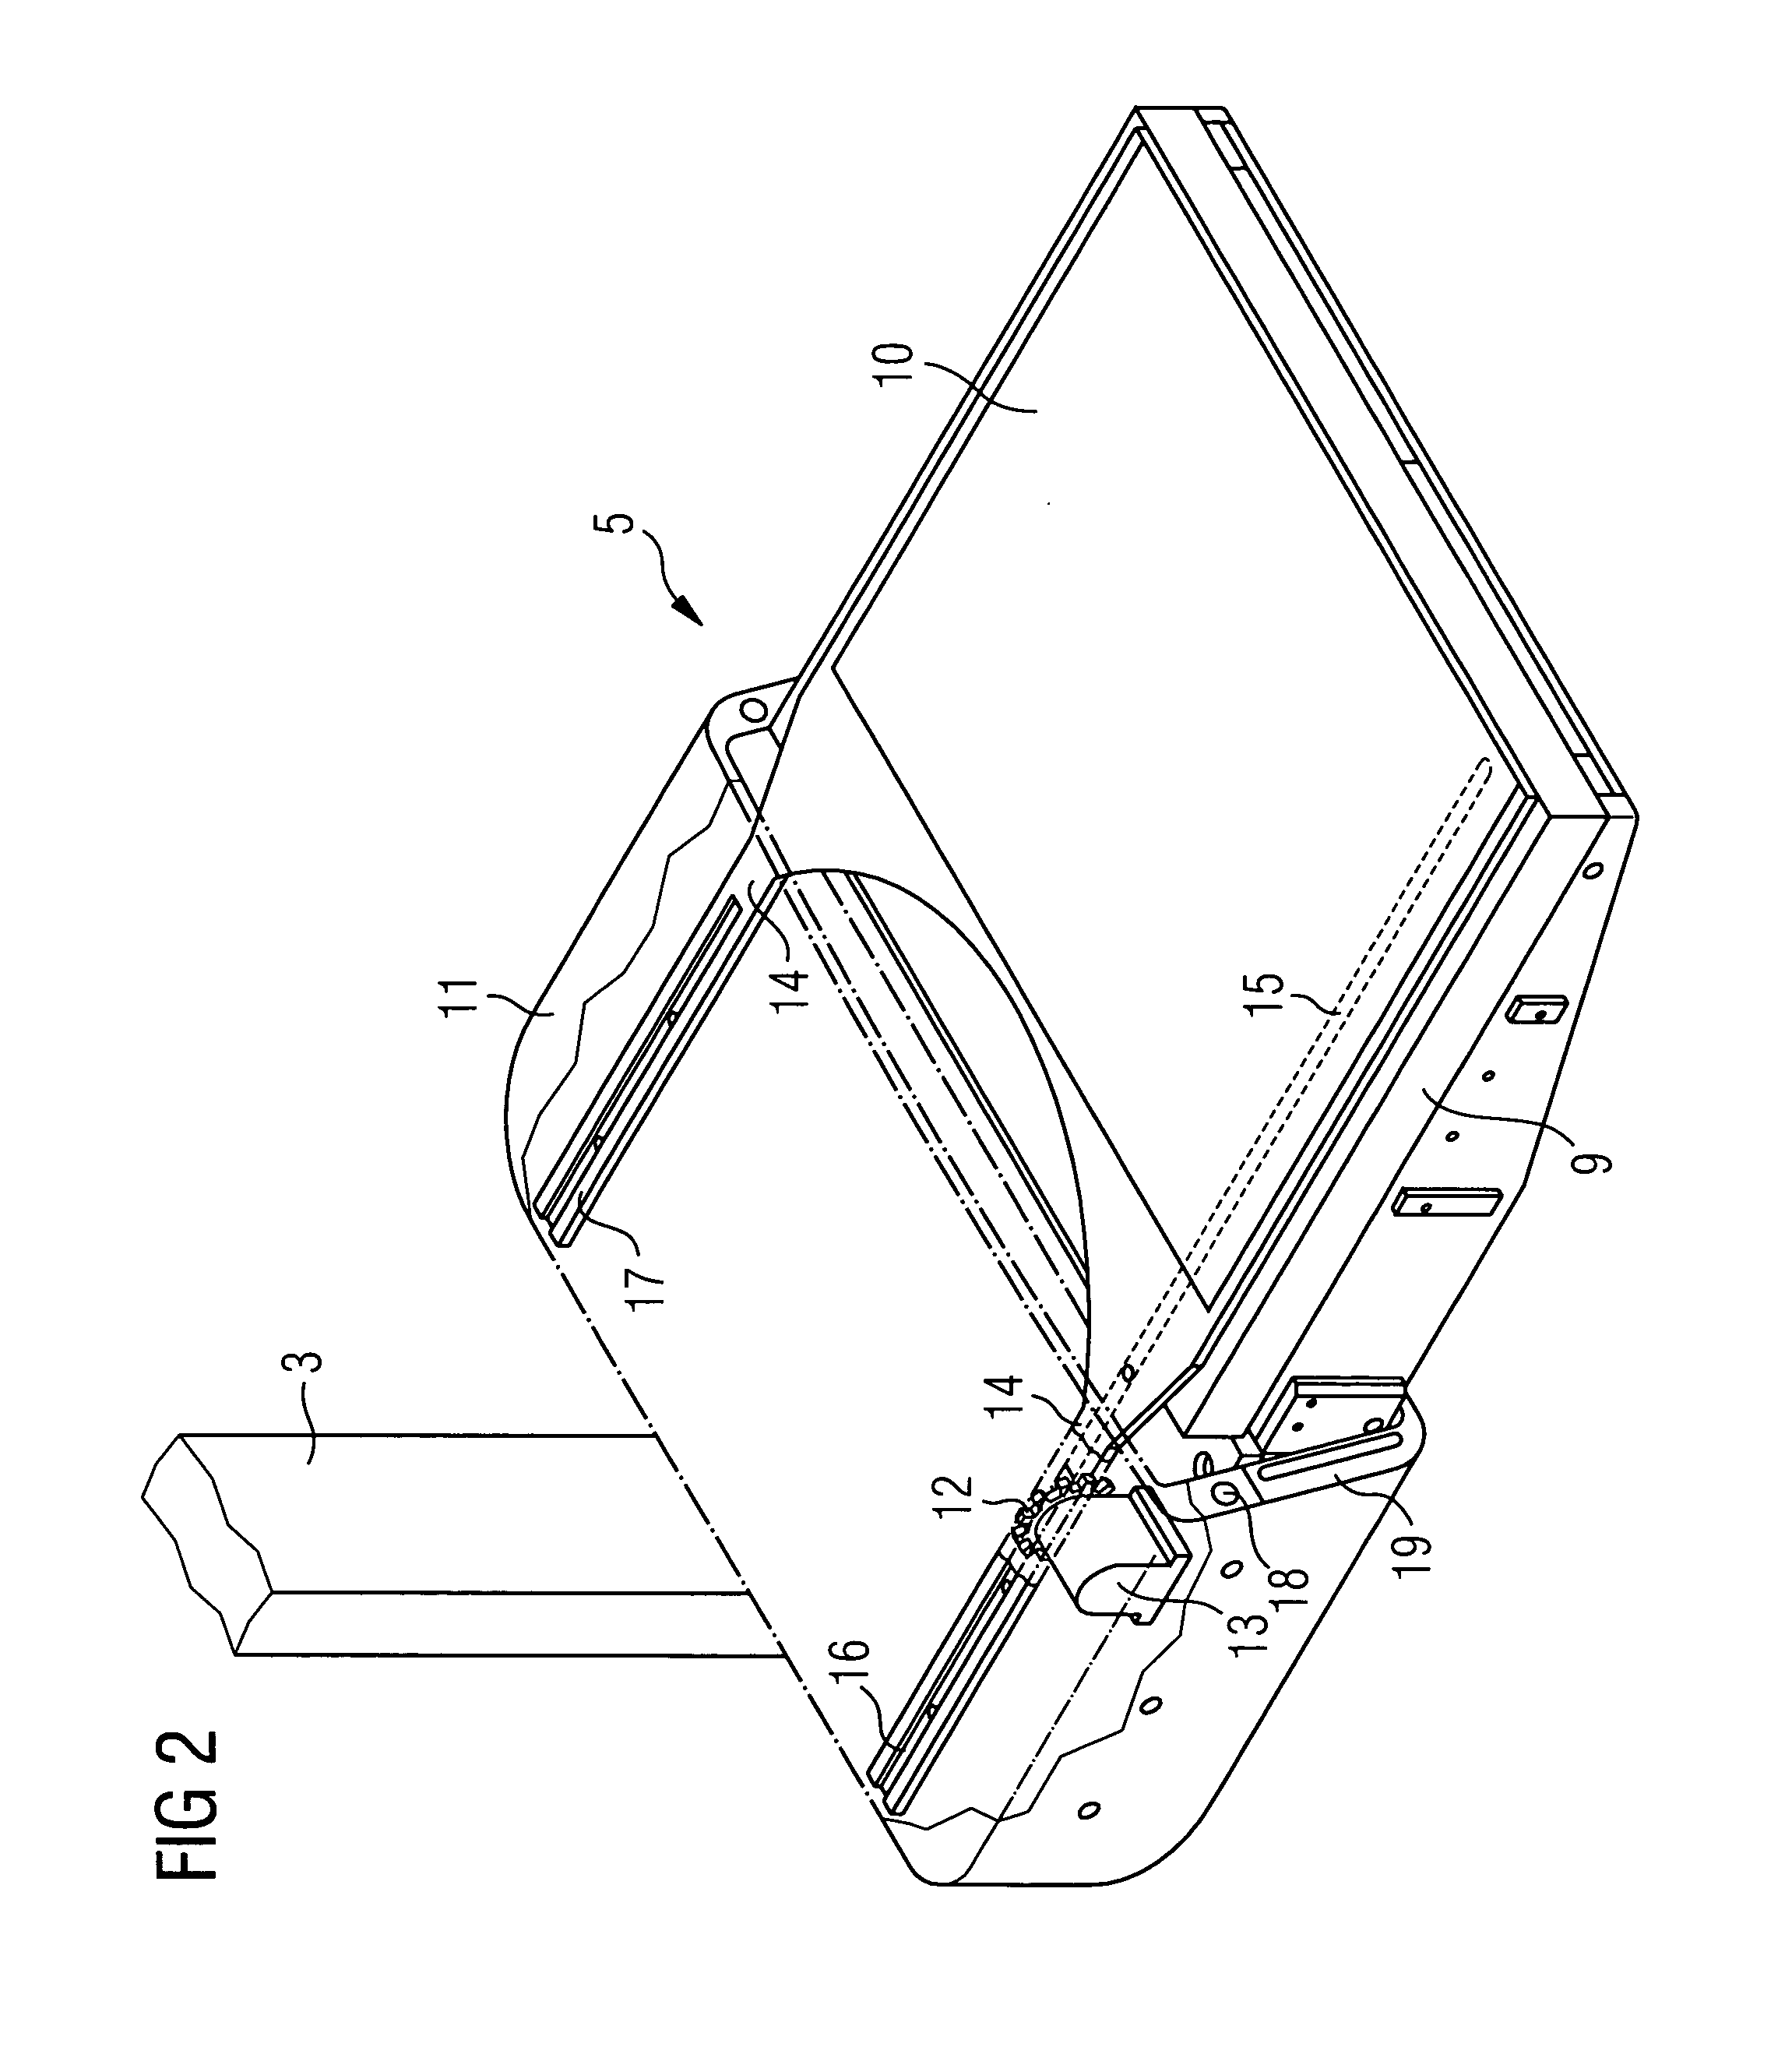 X-ray diagnostic device for mammography examinations